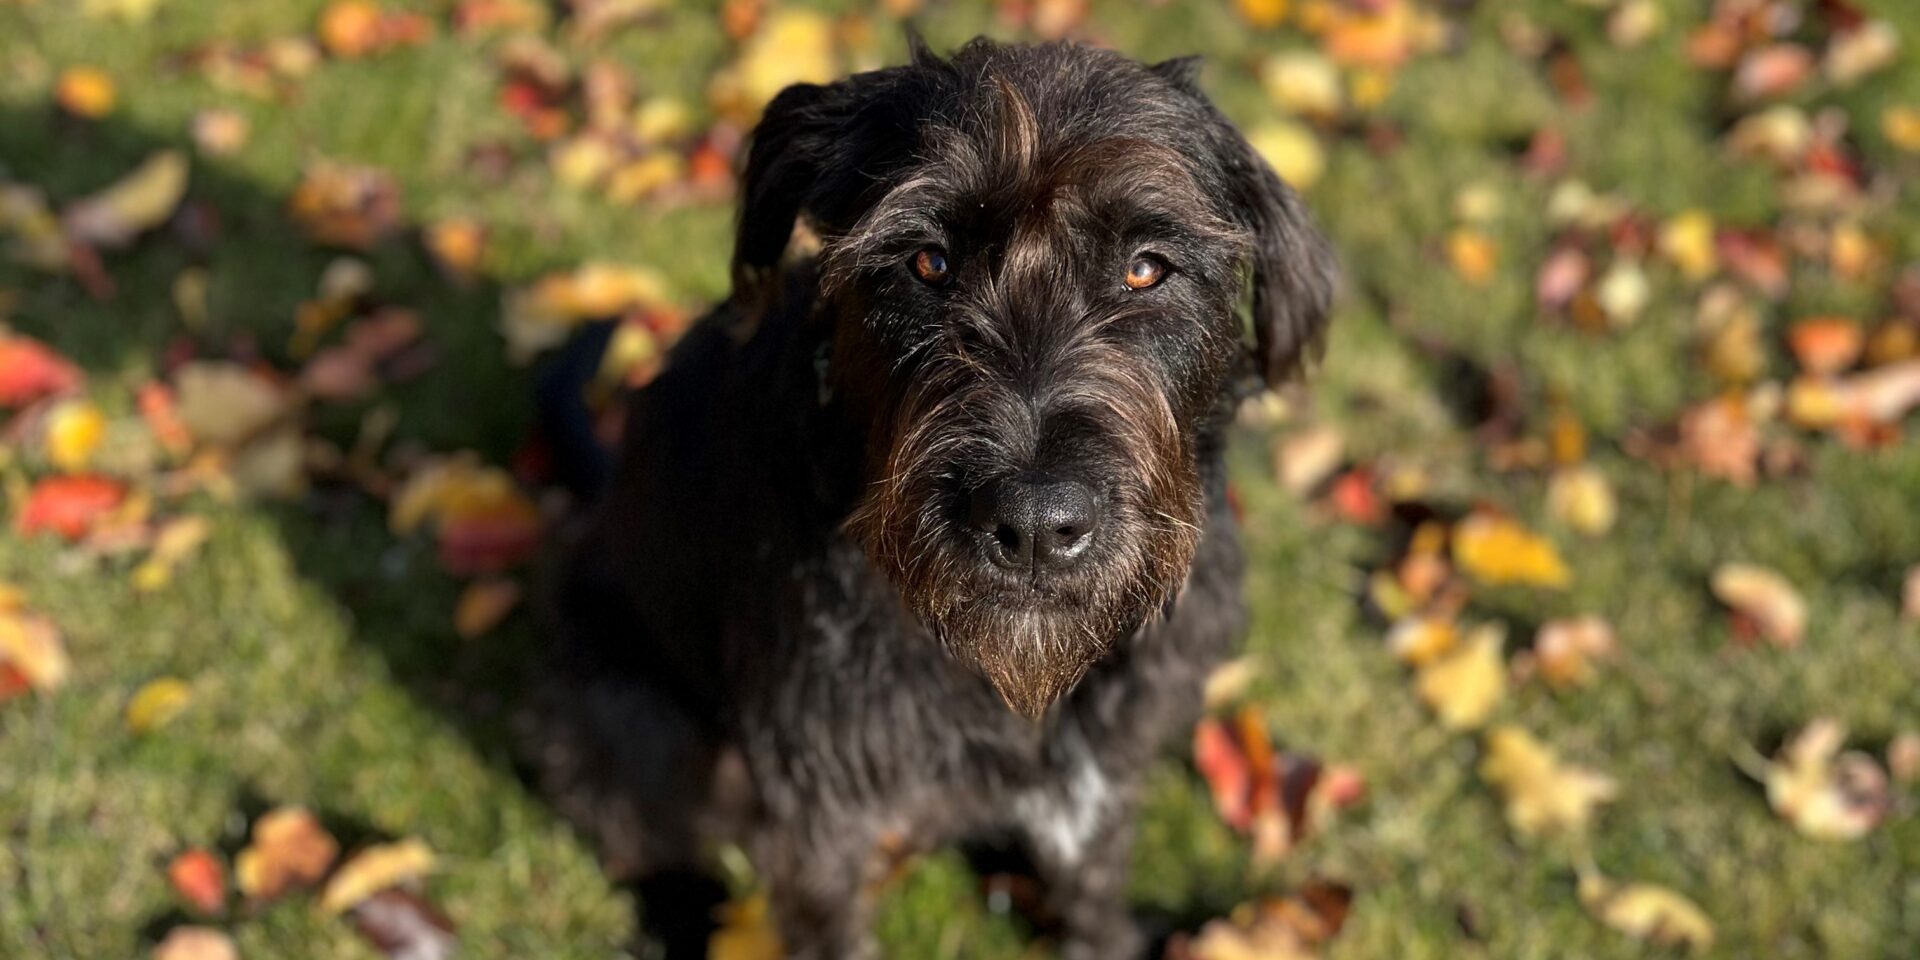 A dog with black hair looking up while sitting on a lawn with leaves in fall.